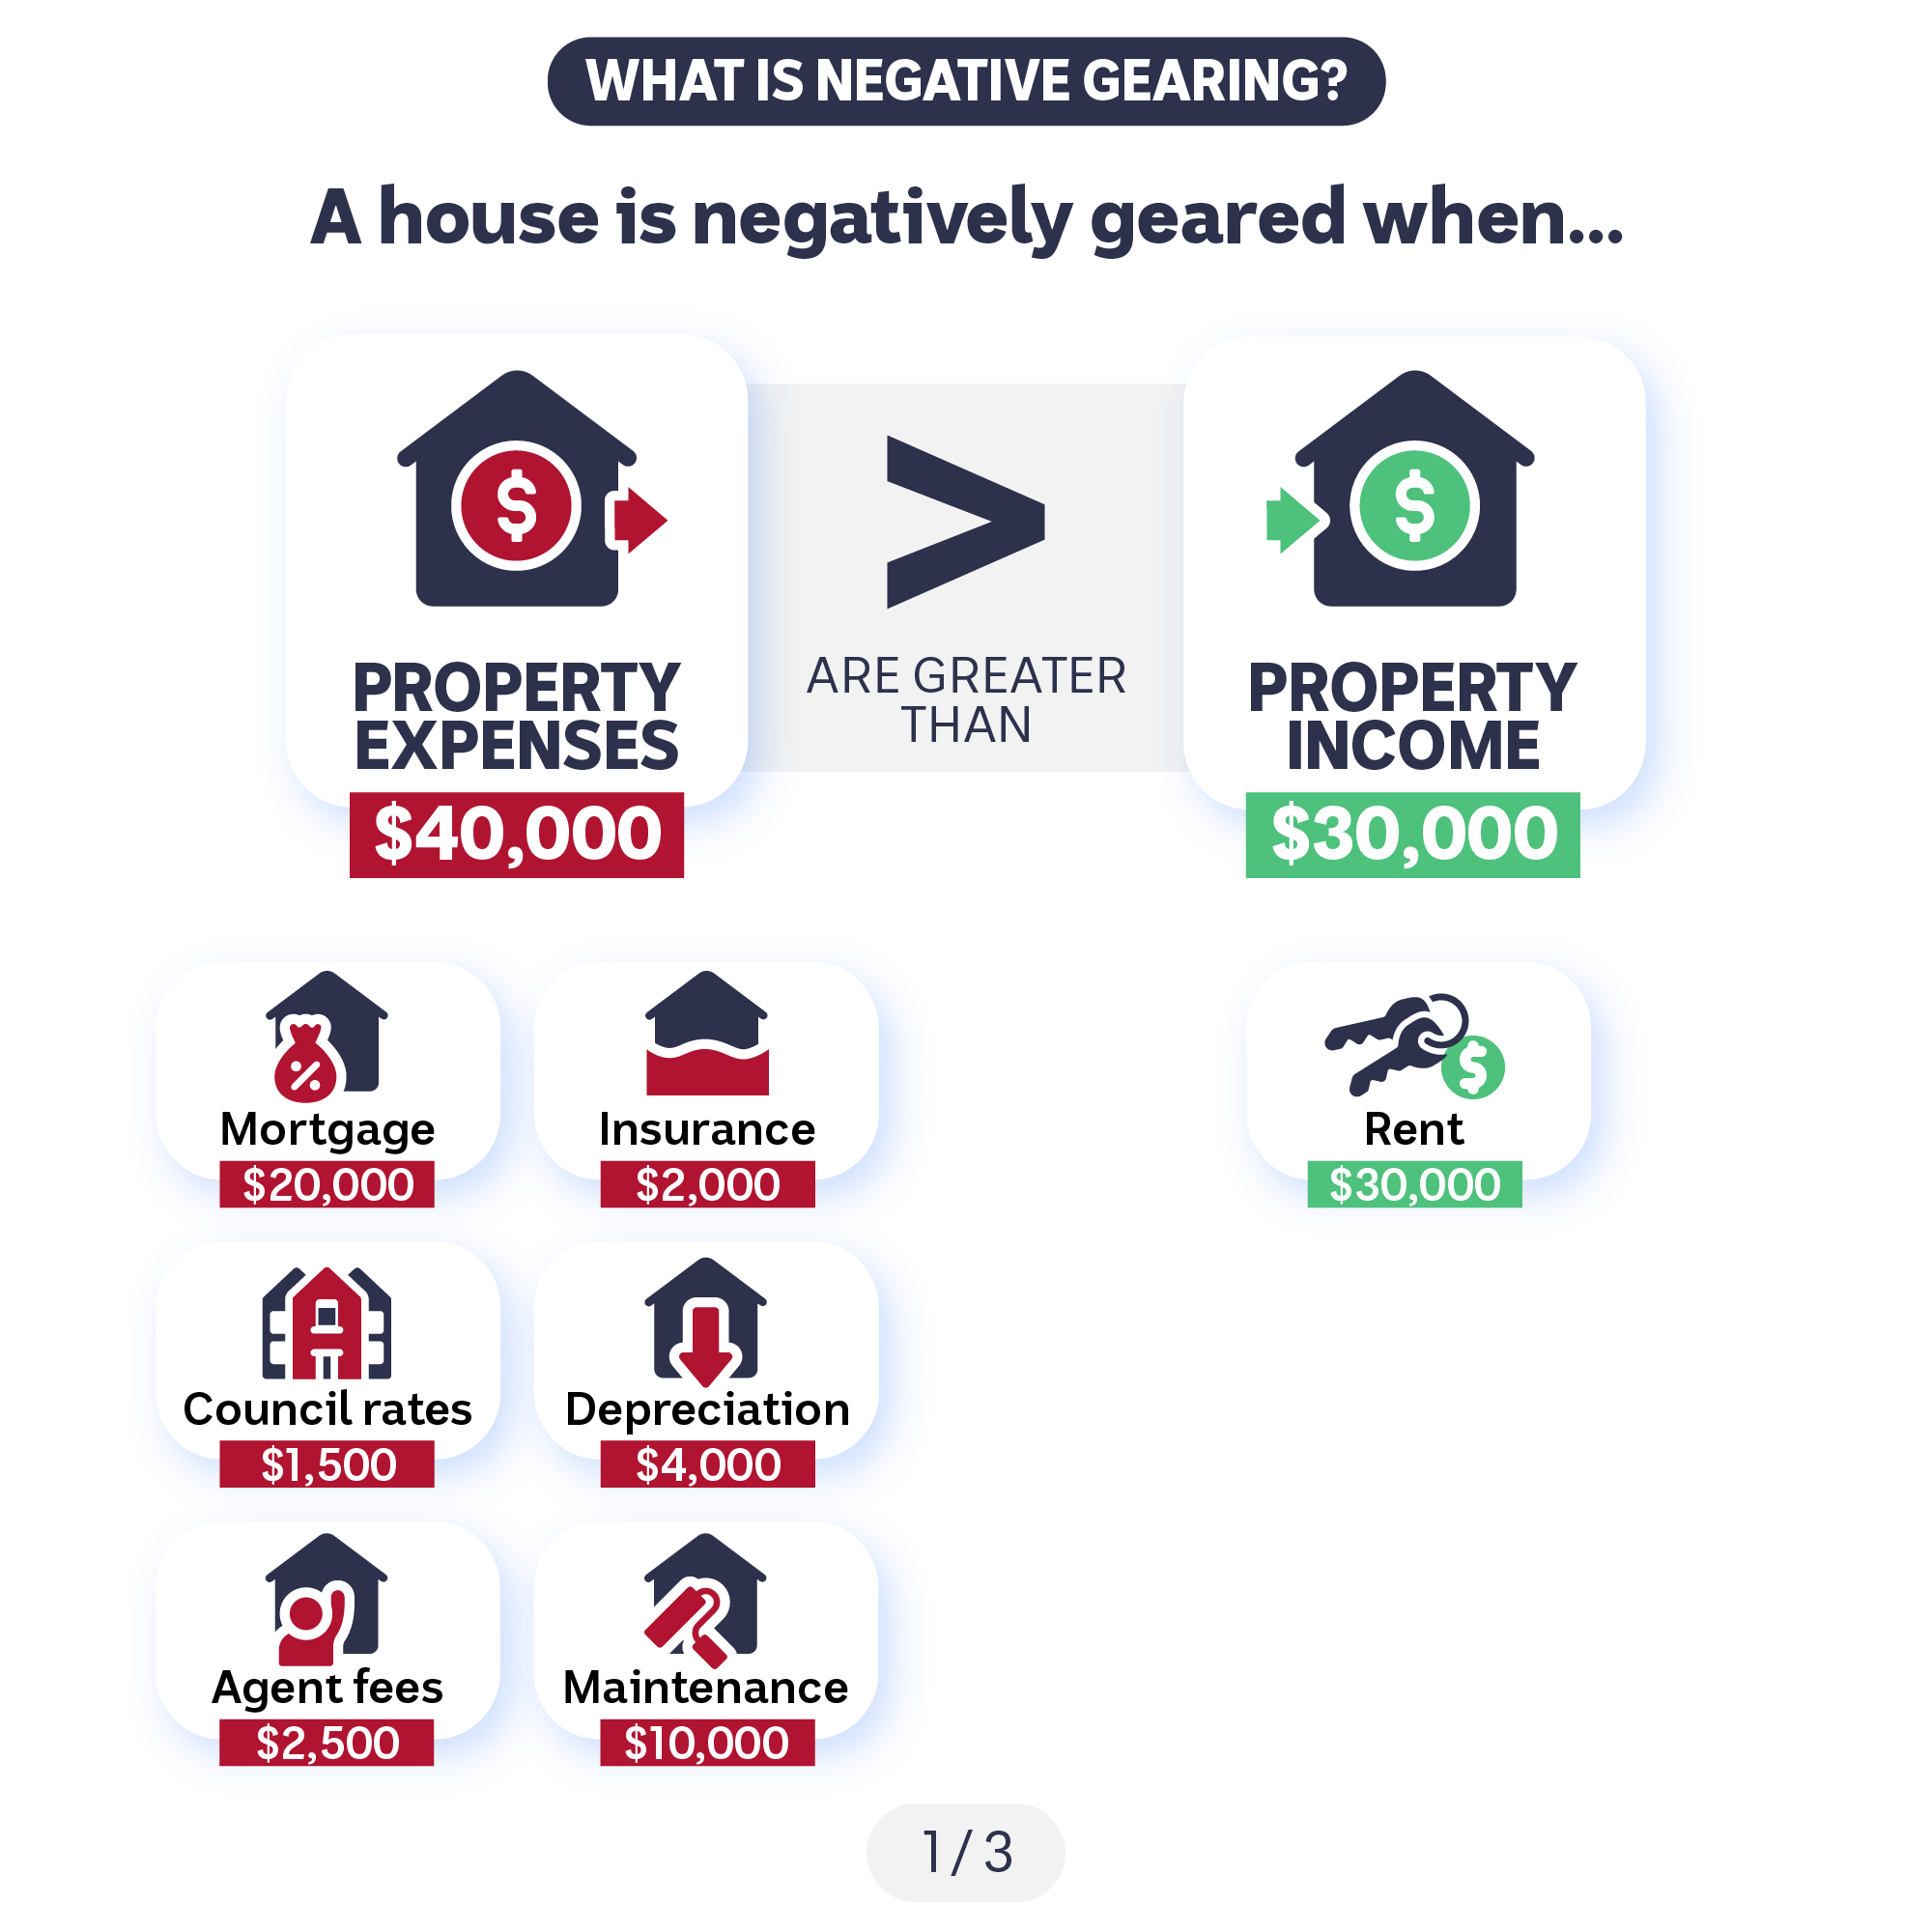 Boxes with icons representing property expenses and a greater than sign showing they are more than property income